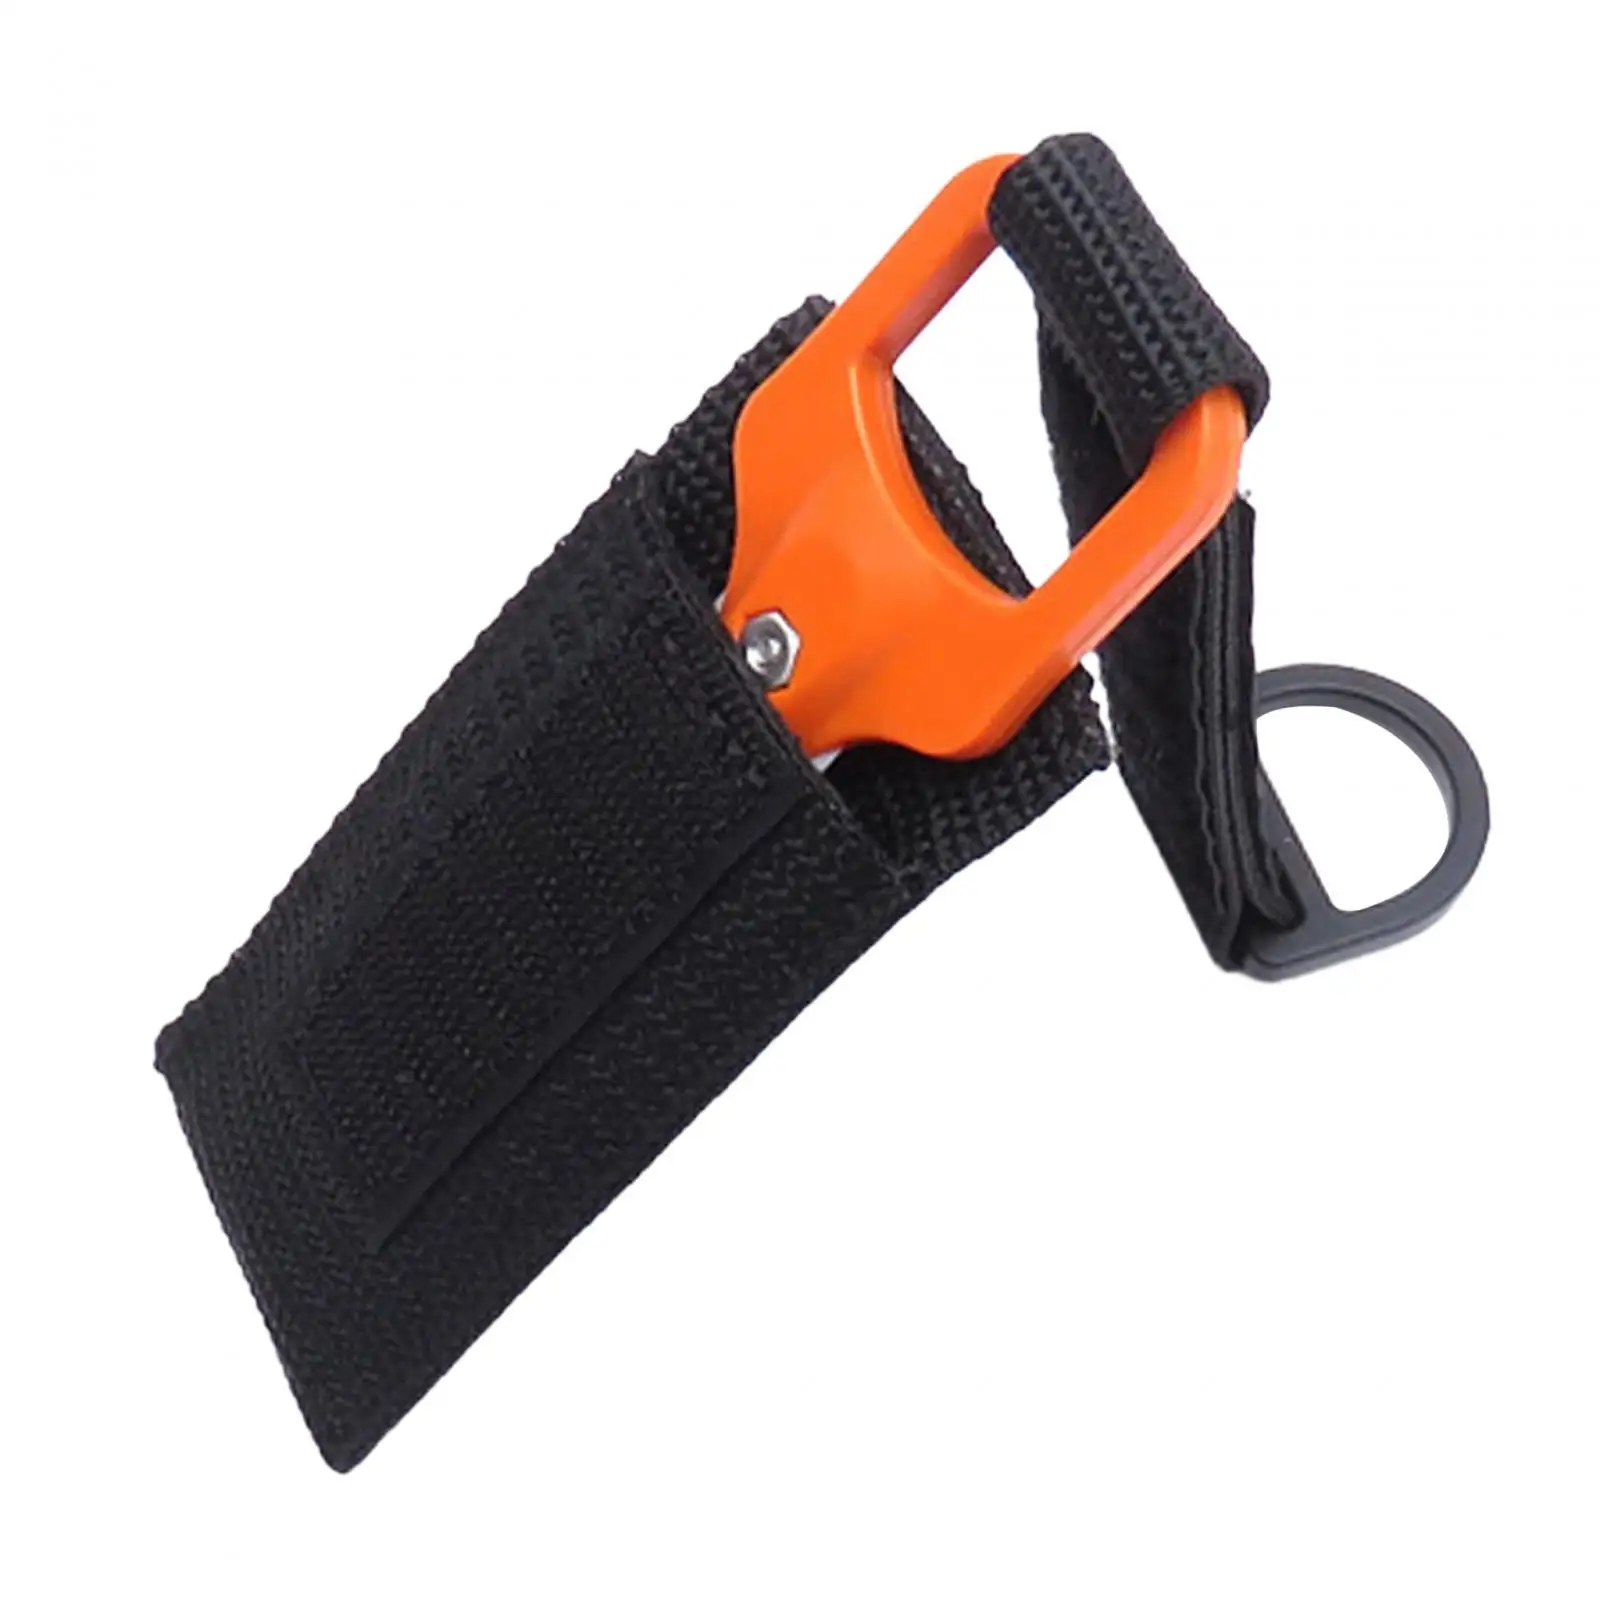 Diving Line Cutter Safety Cutting Tool for Free Diving Underwater Emergency